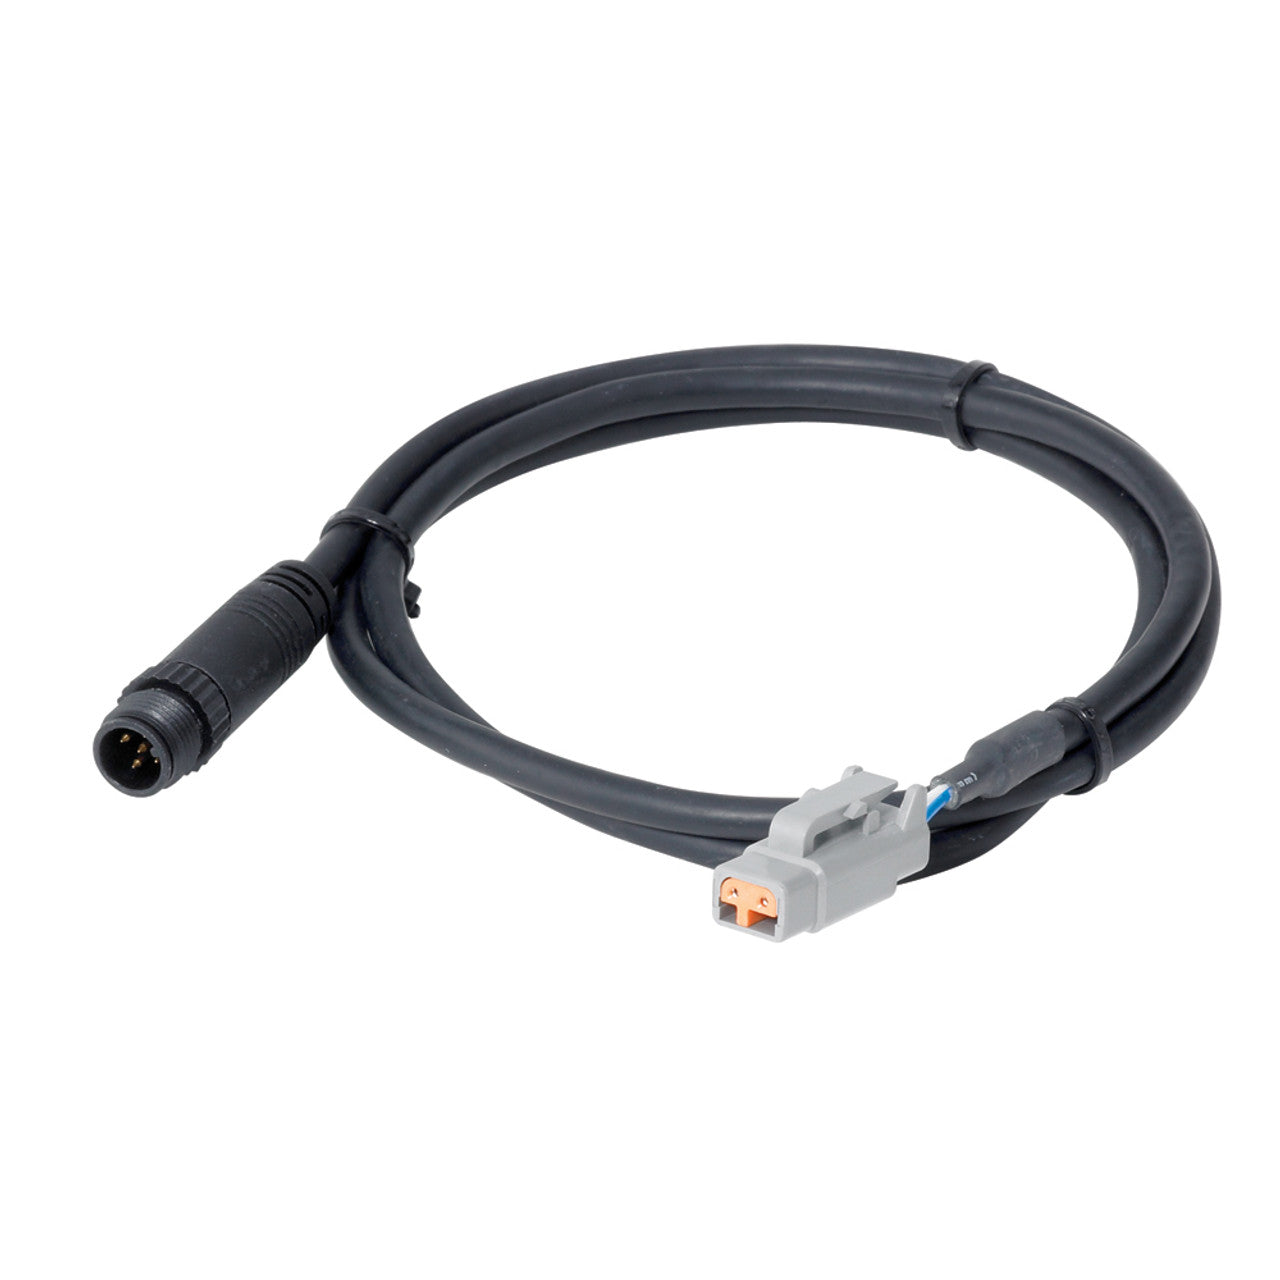 CAN bus # 2 GPS / NMEA 2000 NETWORK ADAPTER CABLE ASSEMBLY - 2.5'